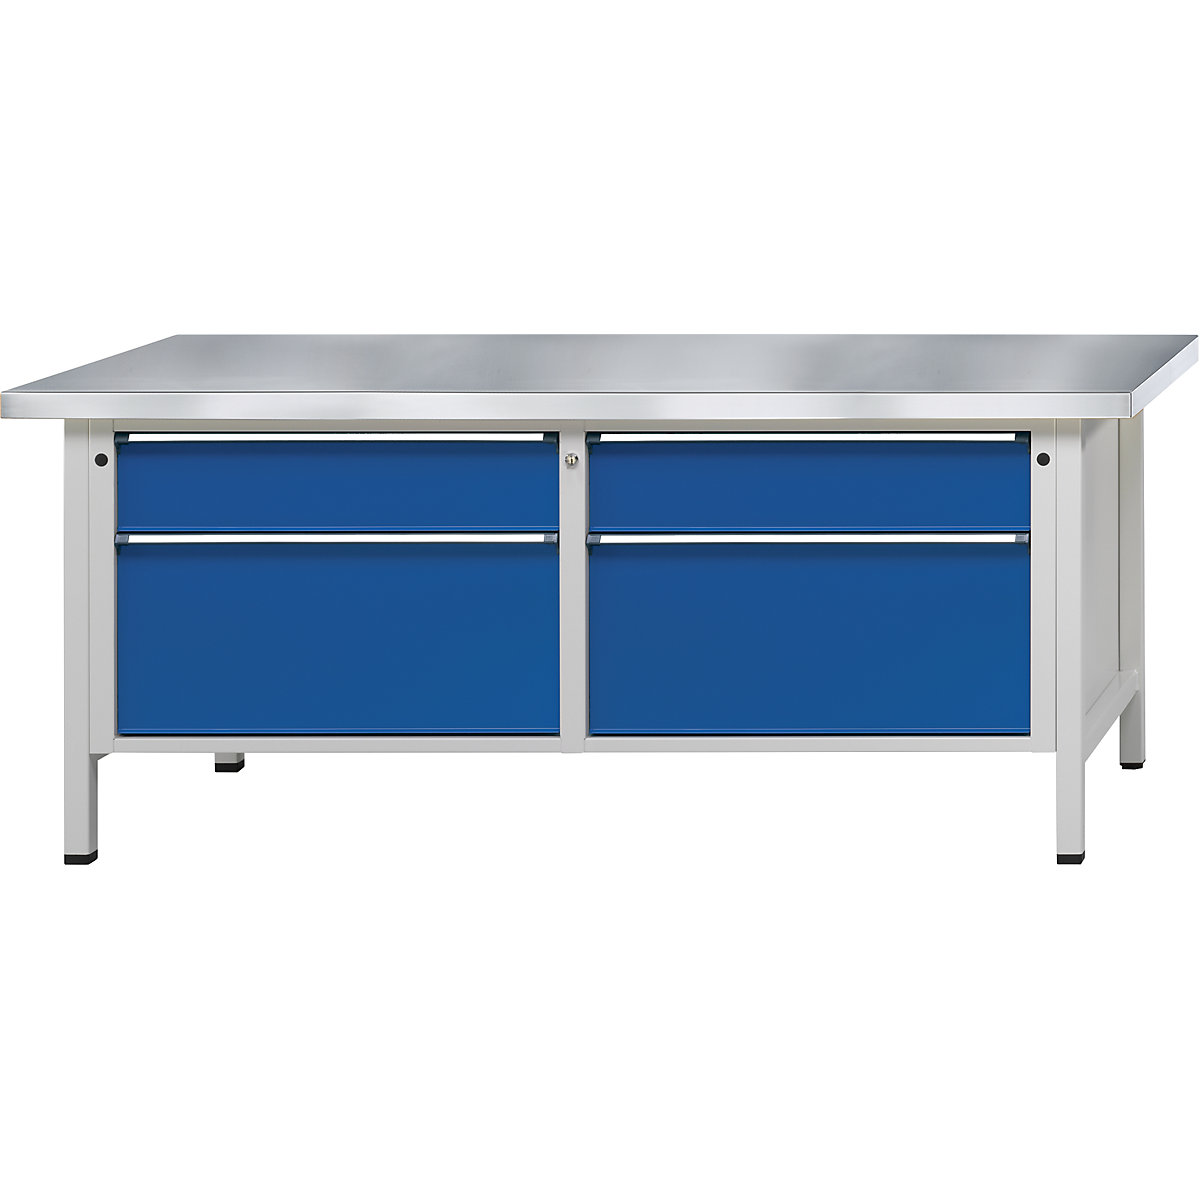 Workbenches 2000 mm wide, frame construction – ANKE, 4 drawers, sheet steel covered worktop, height 840 mm-11